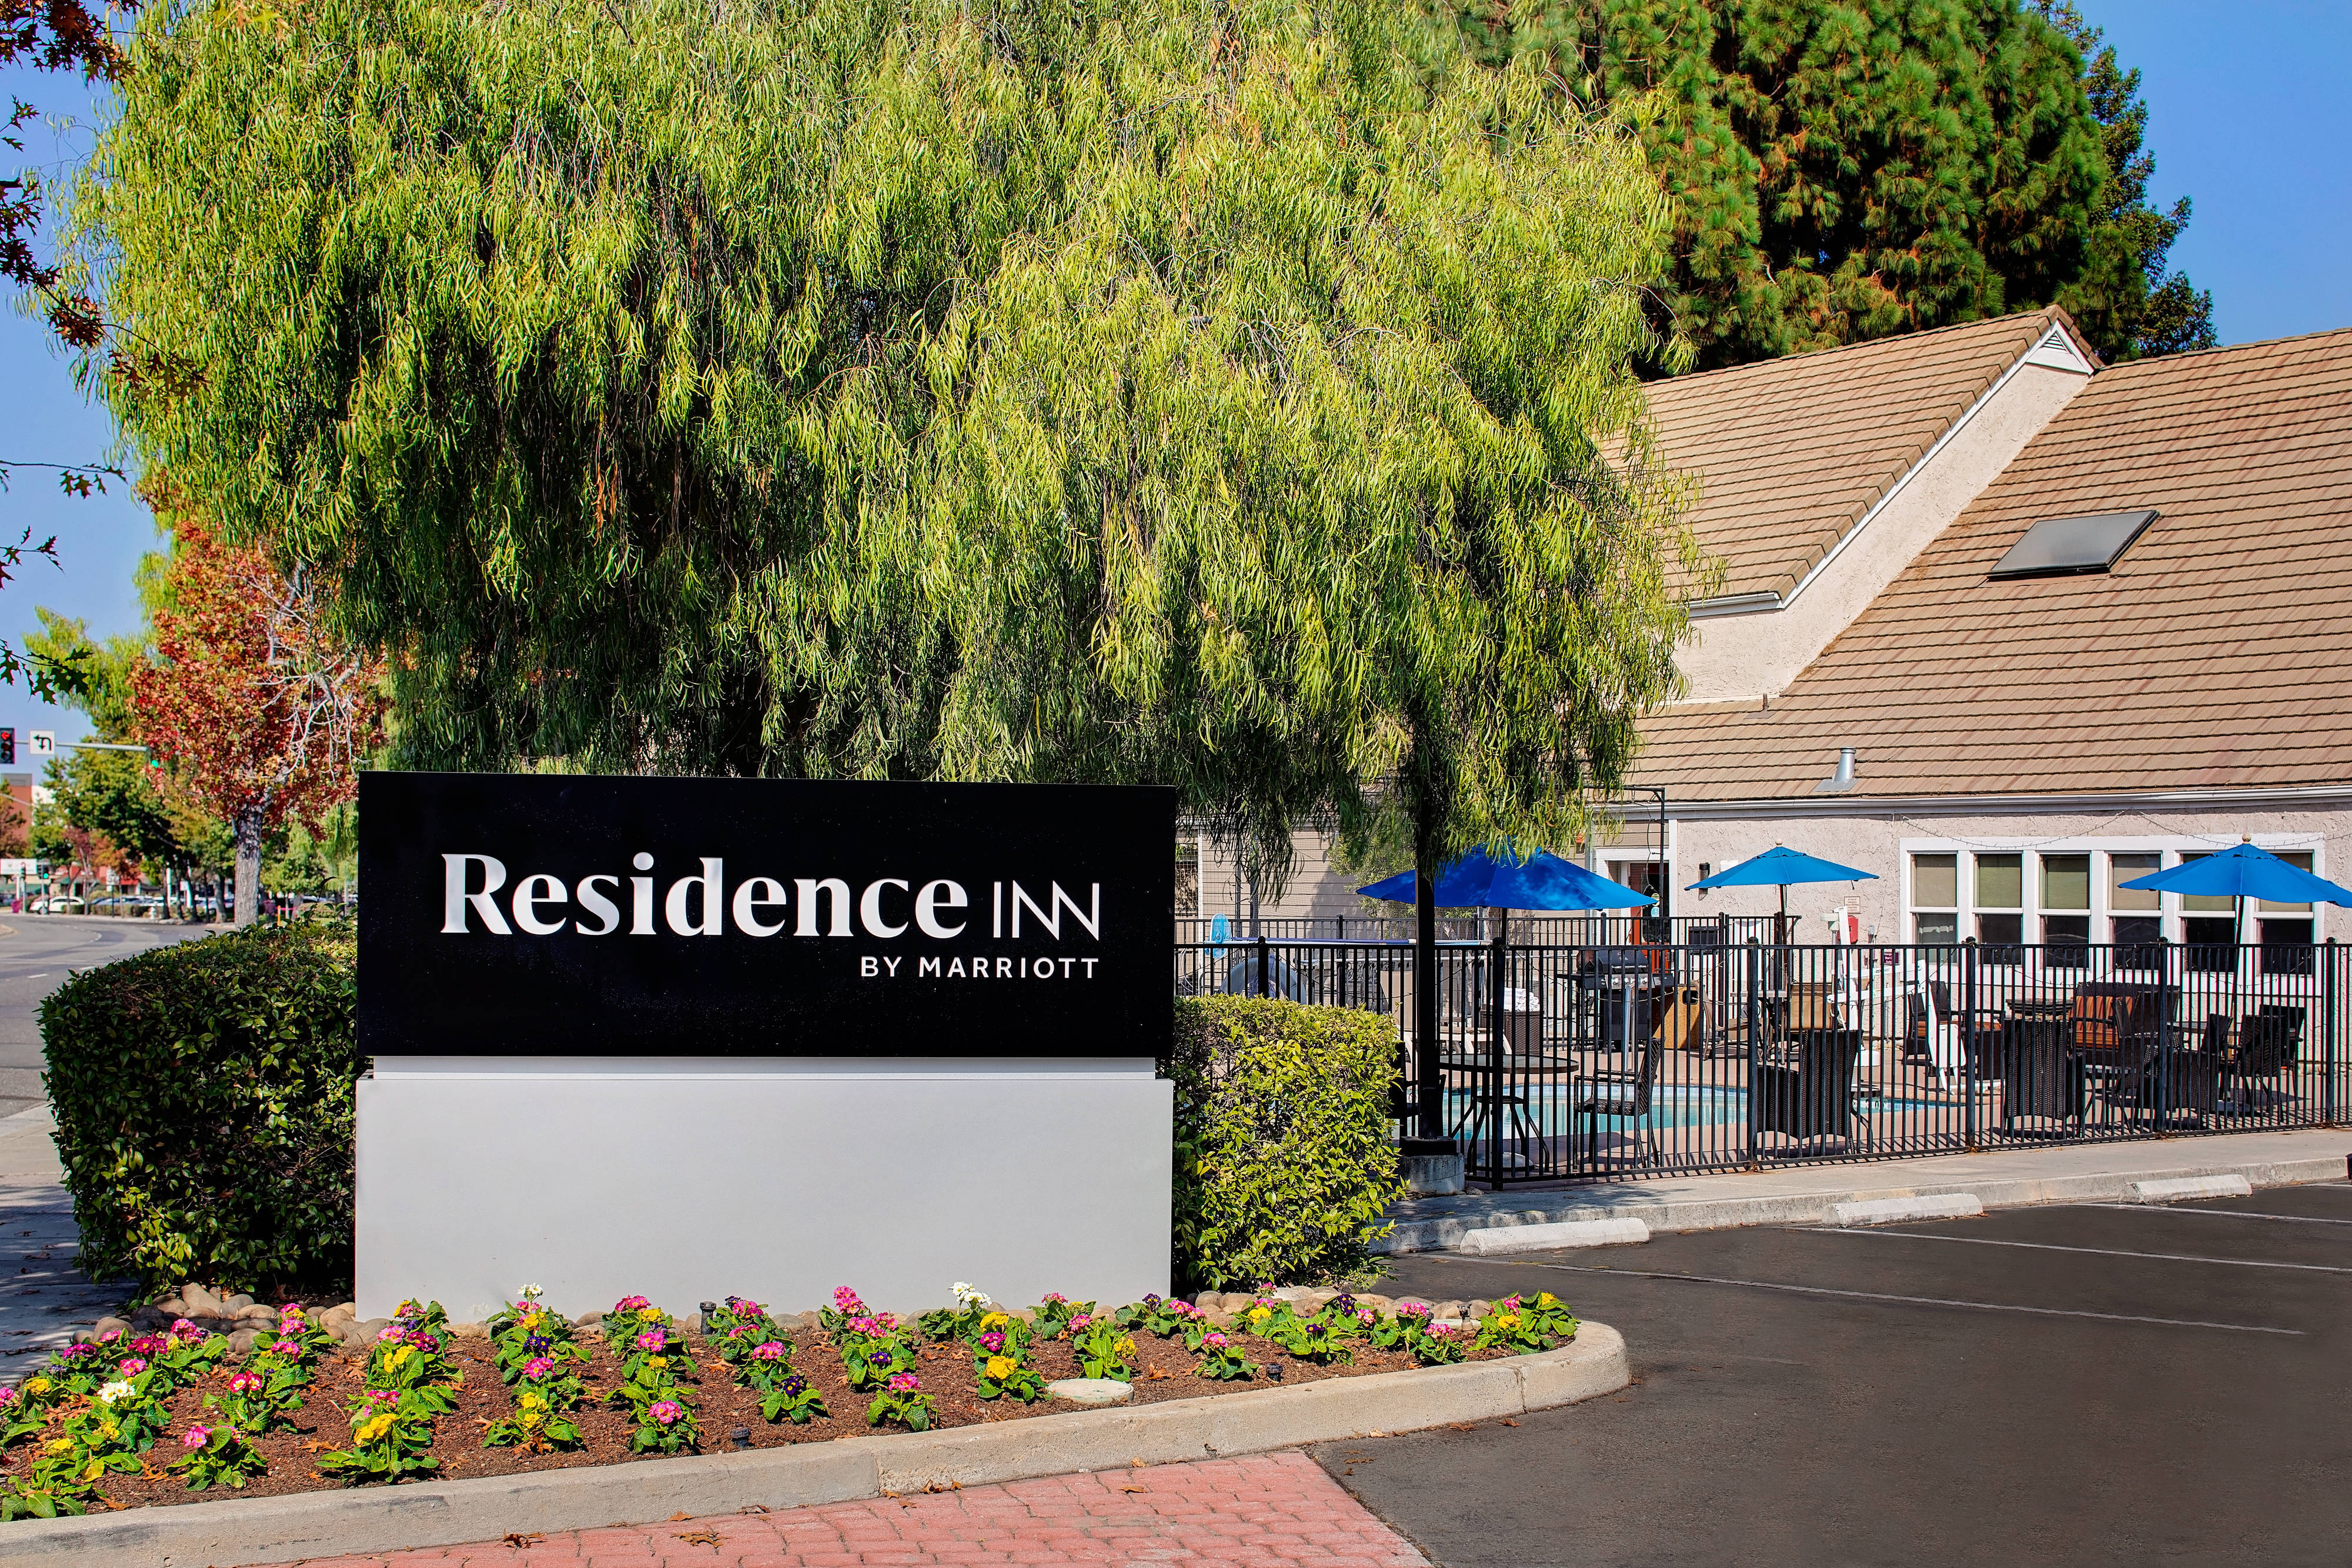 Photo of Residence Inn by Marriott Palo Alto, Mountain View, CA